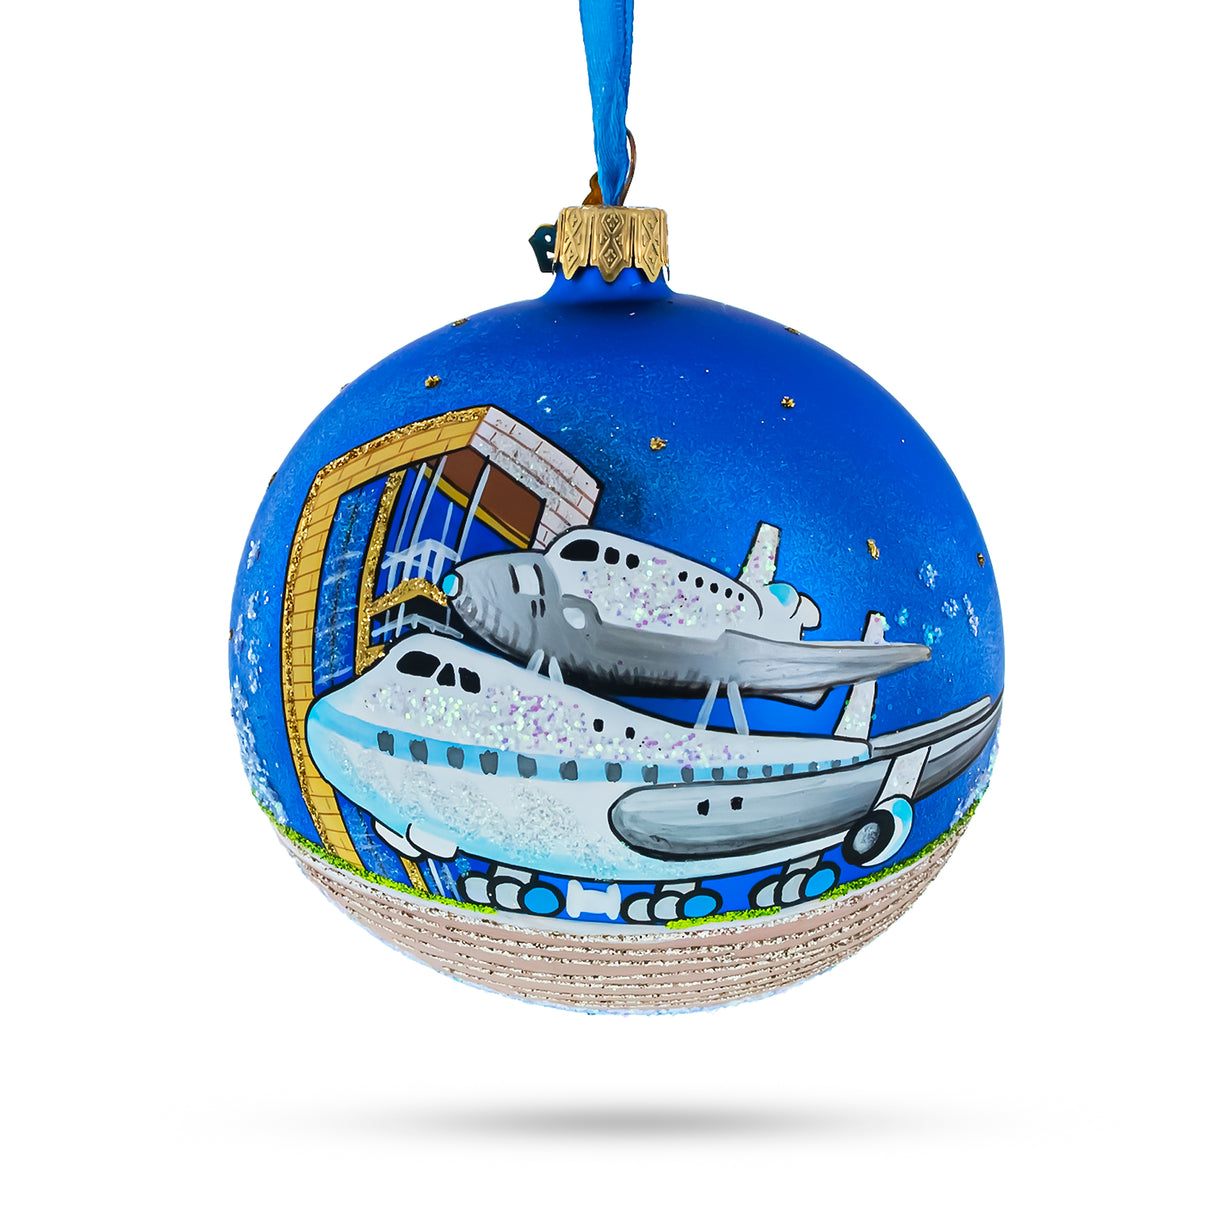 Glass Space Center, Houston, Texas, USA Glass Ball Christmas Ornament 4 Inches in Blue color Round